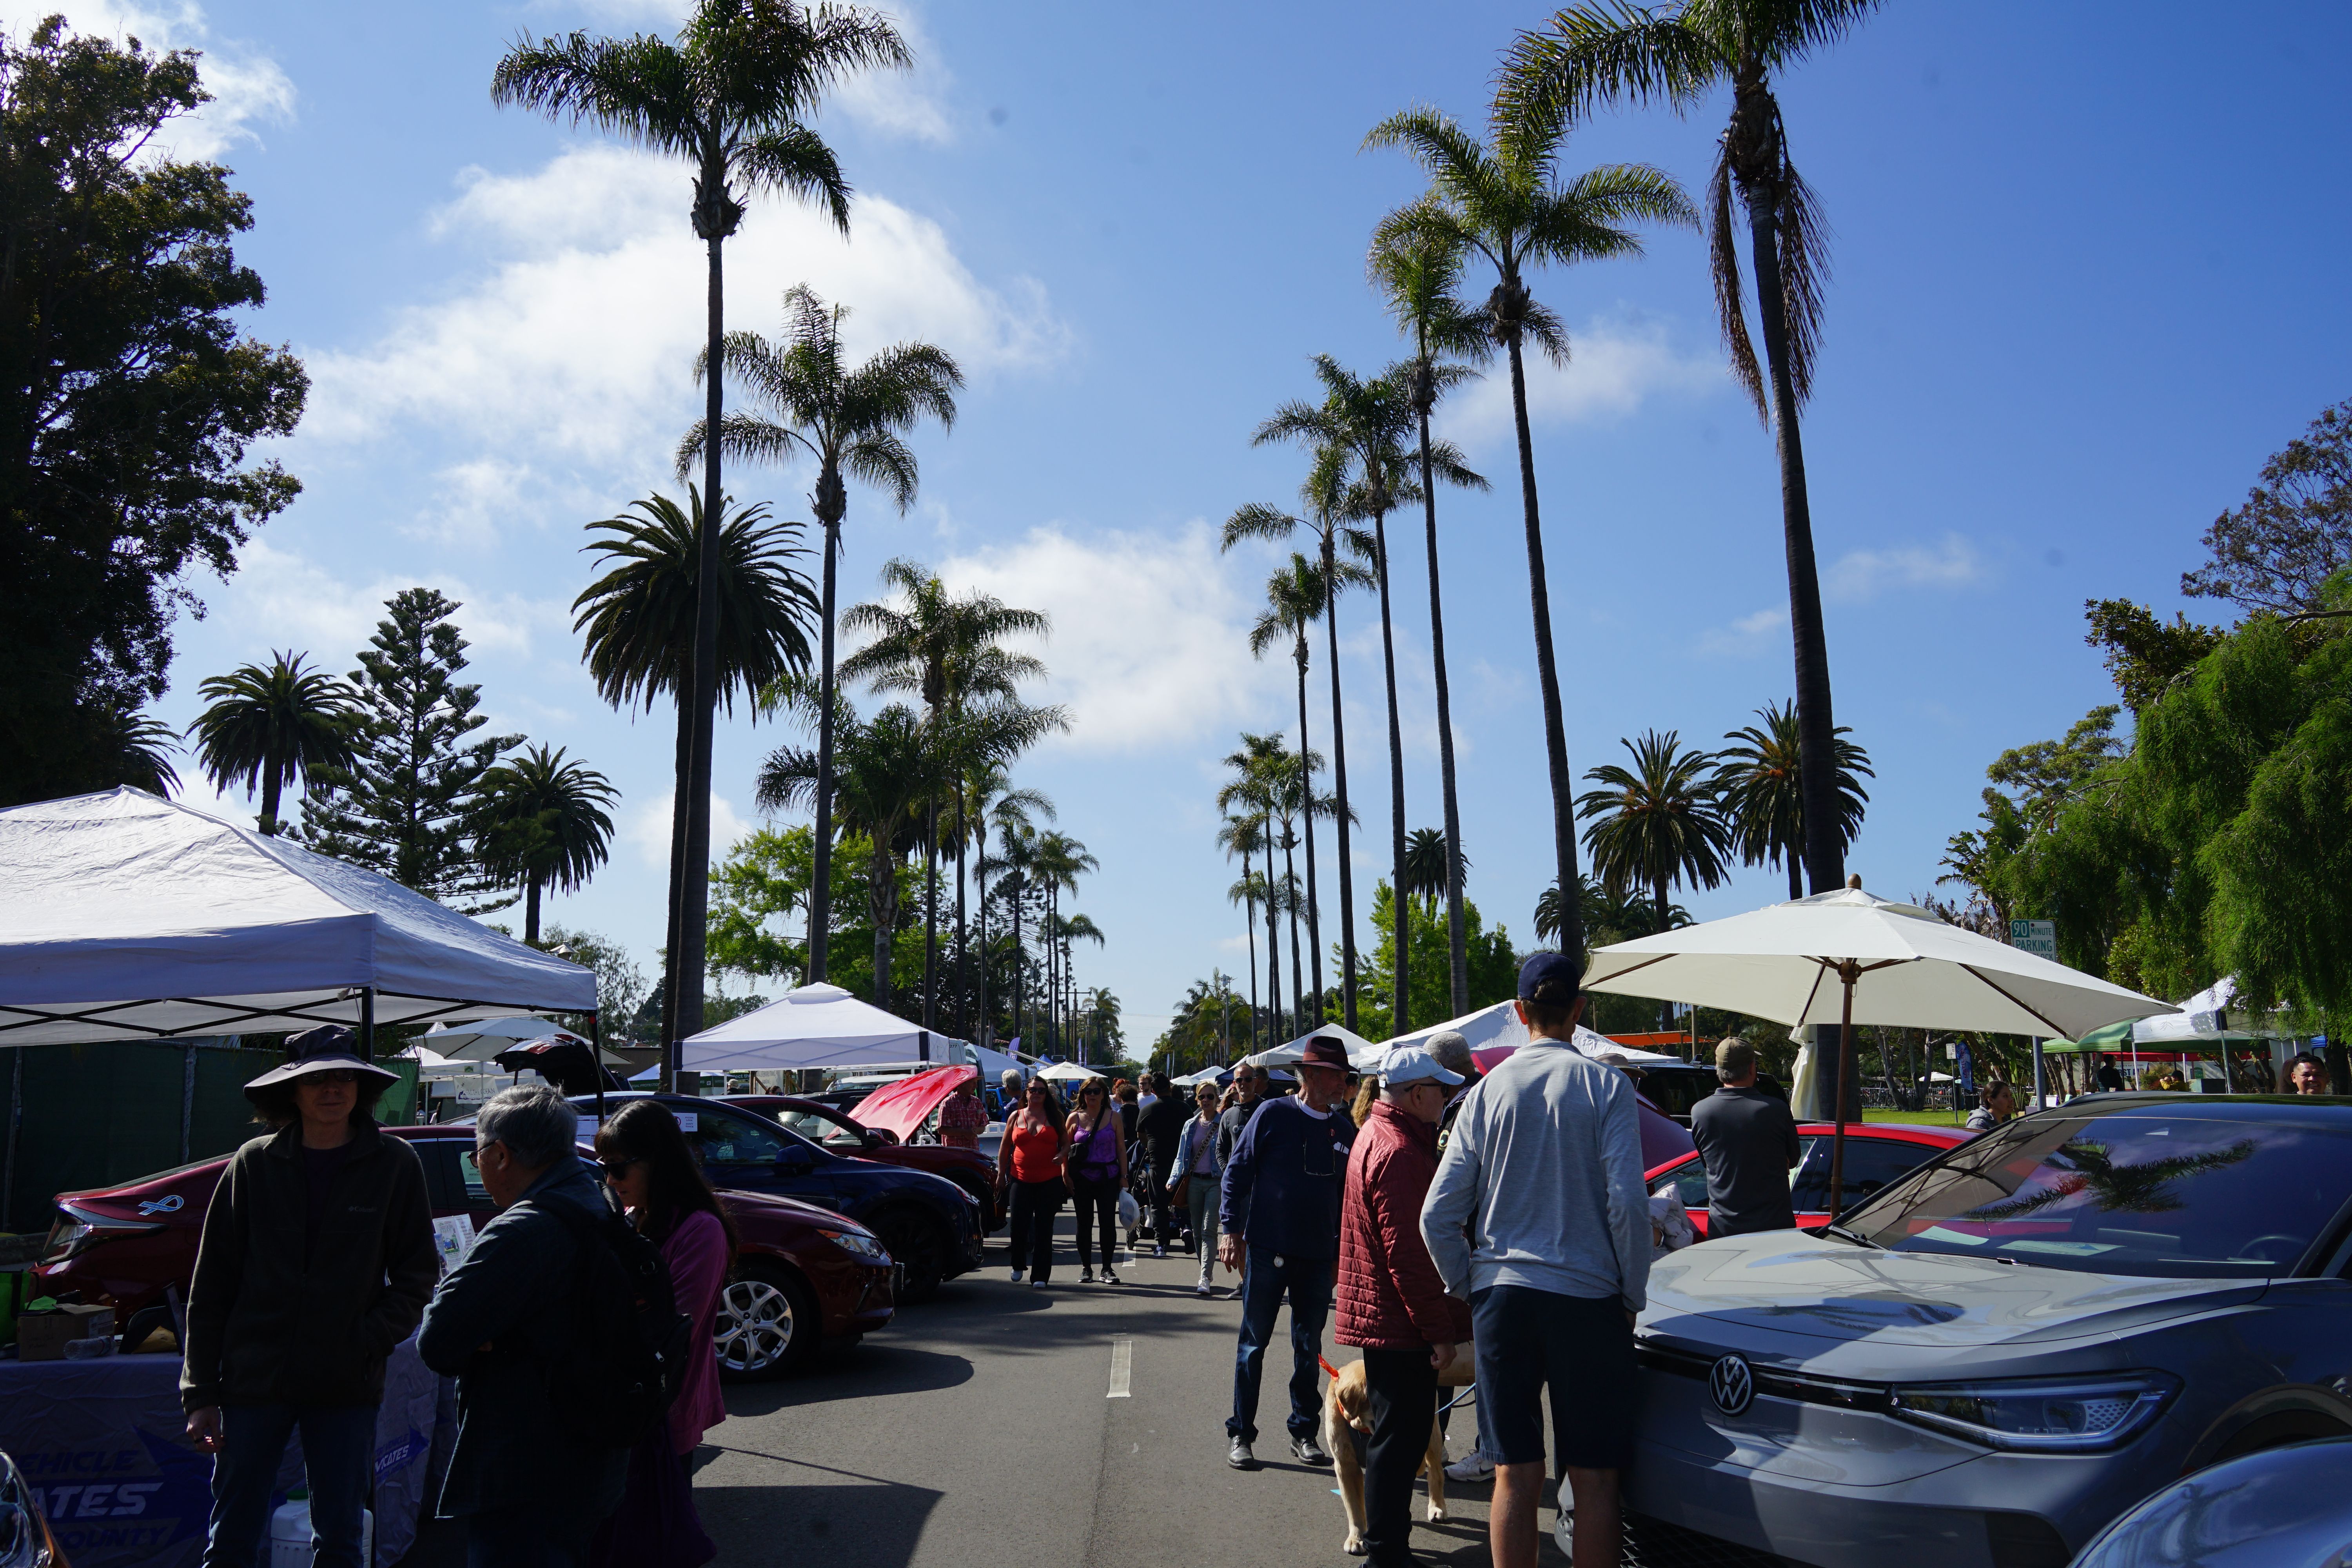 Booths lined up at Santa Barbara Earth Day with electric cars and people in the foreground.